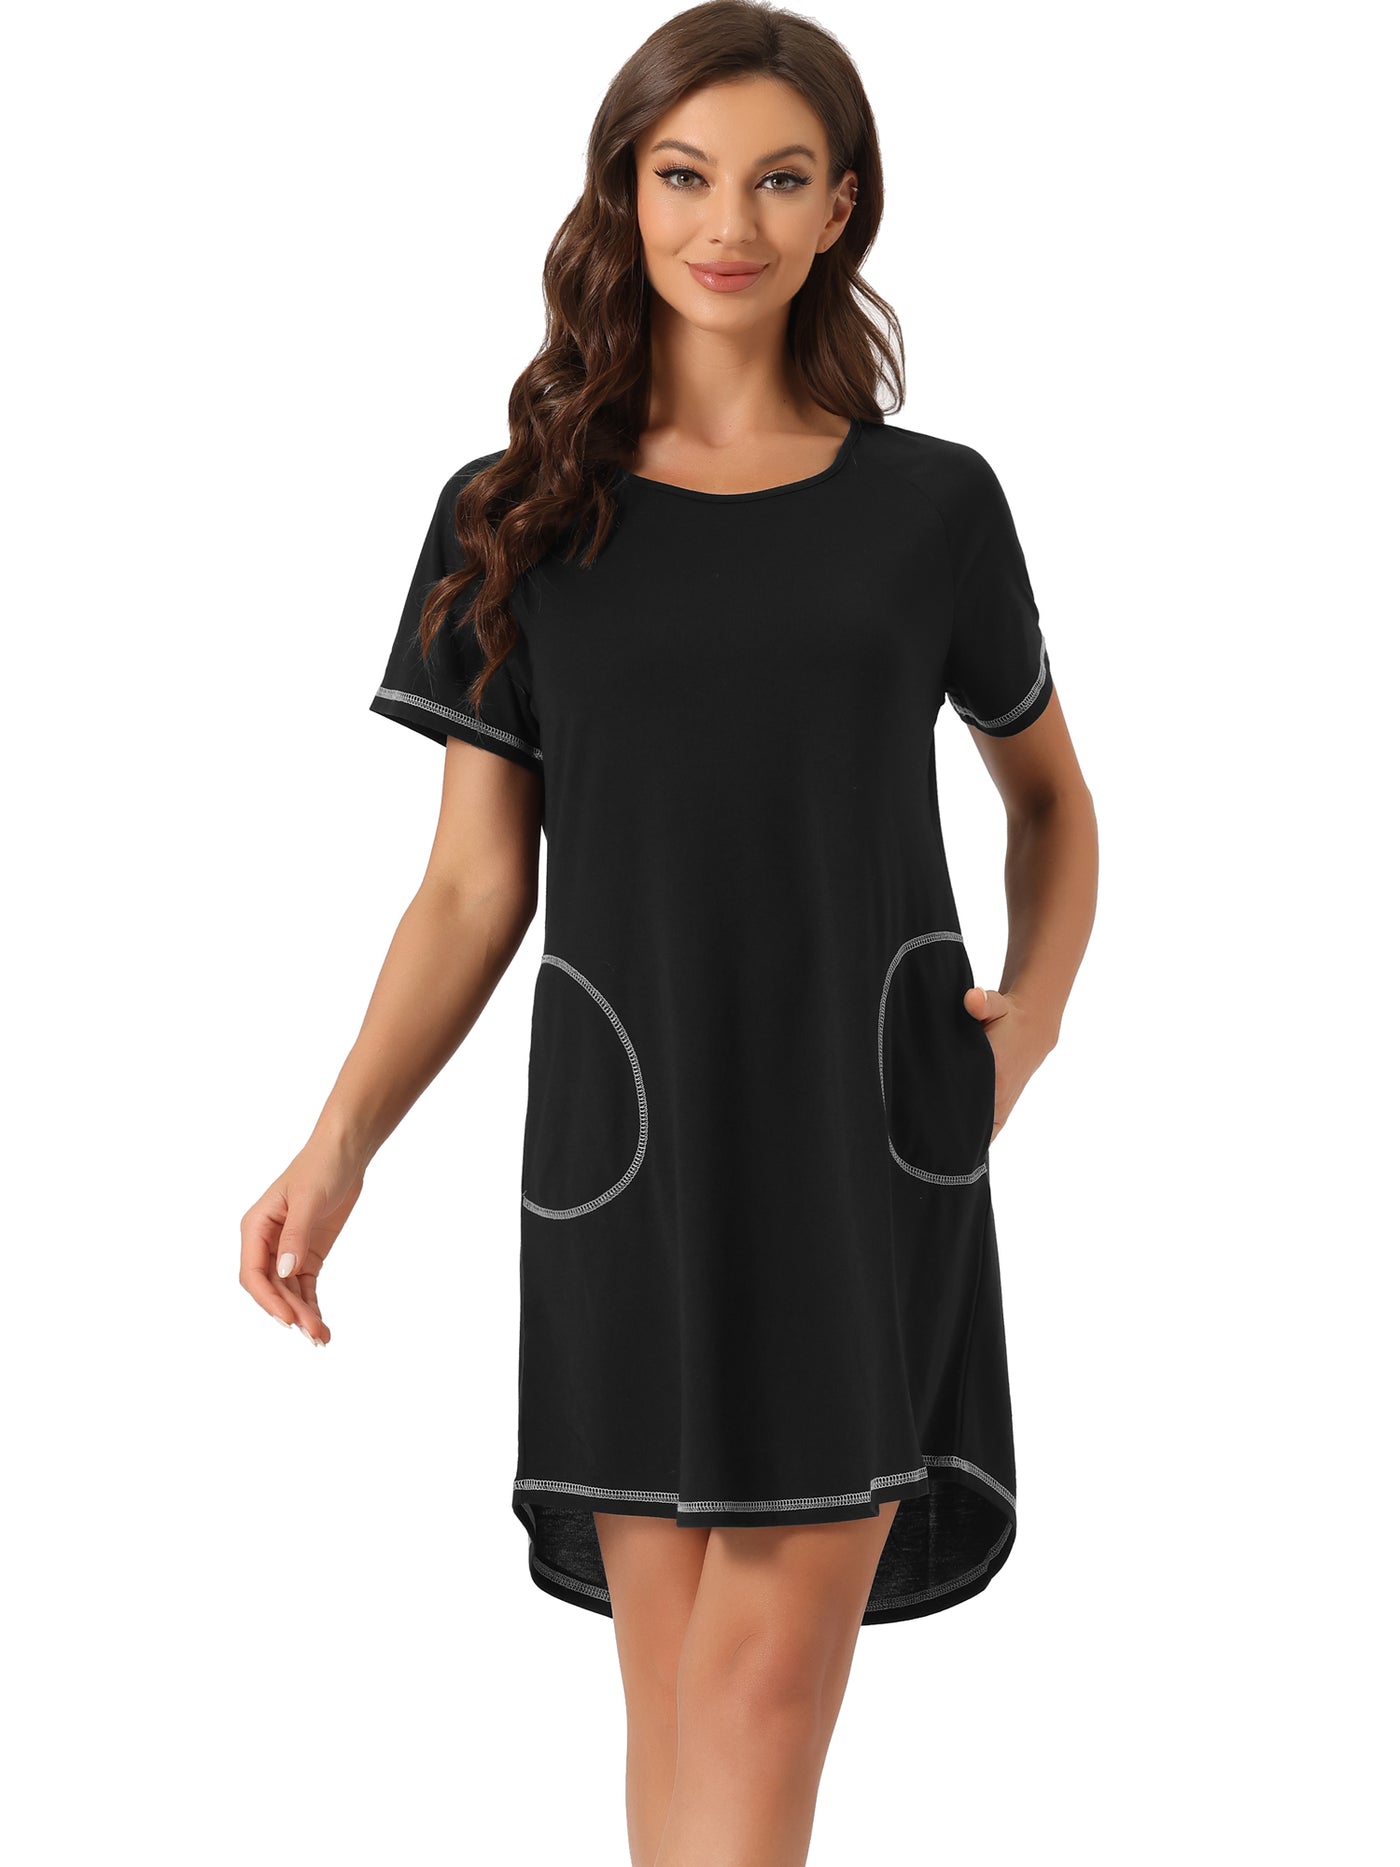 Bublédon Womens Pajama Dress with Pockets Round Neck Short Sleeves Lounge Nightgowns